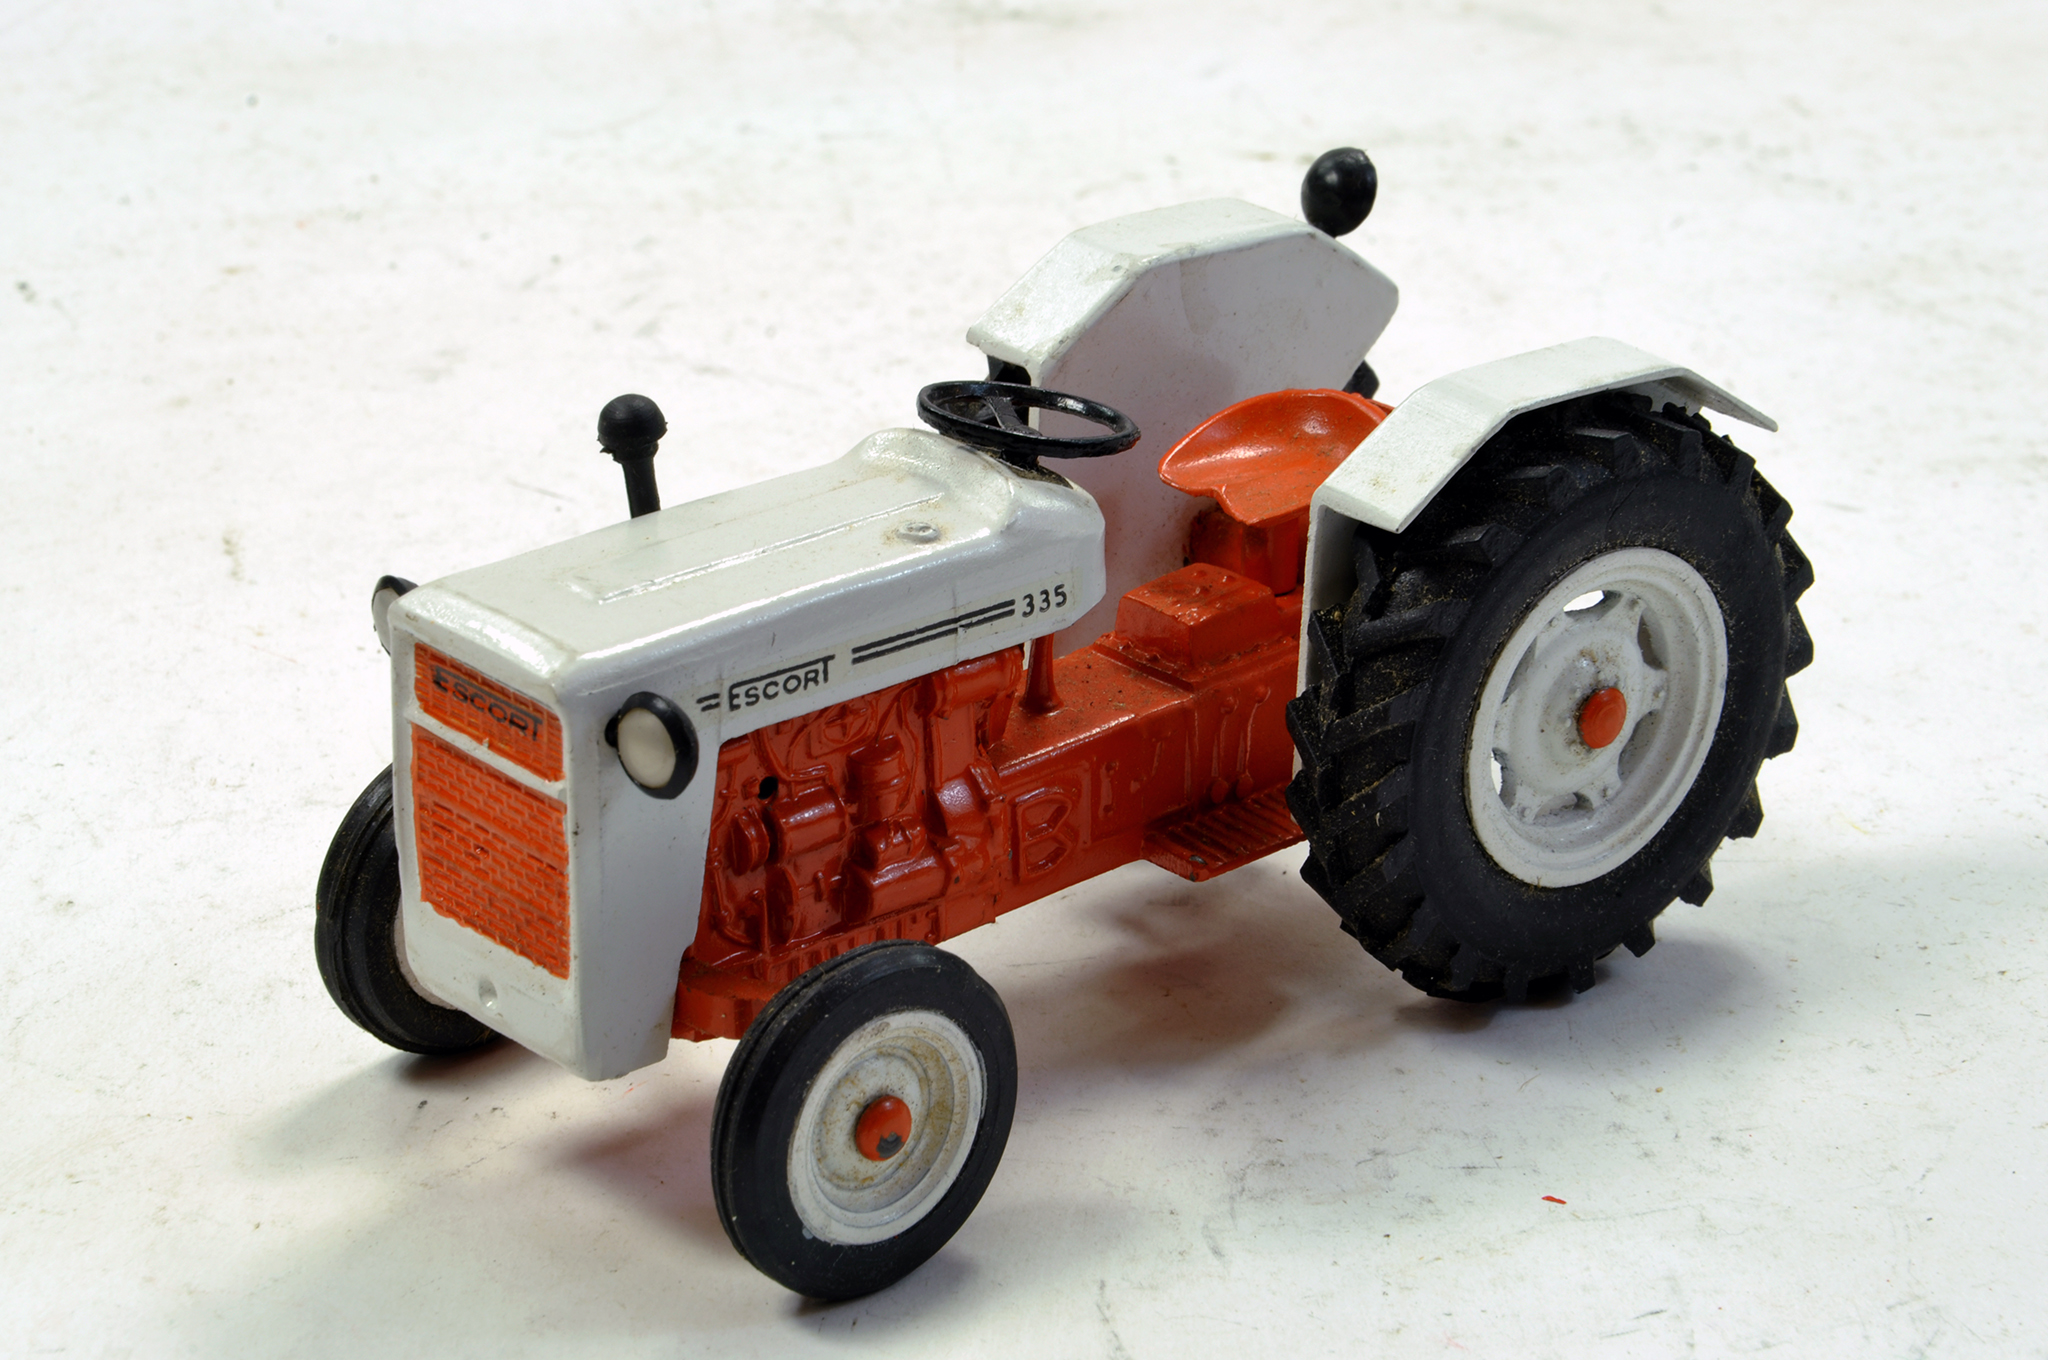 Milton India 1/25 Escort 335 Tractor. No Box/Boxes but complete and excellent. No apparent faults.